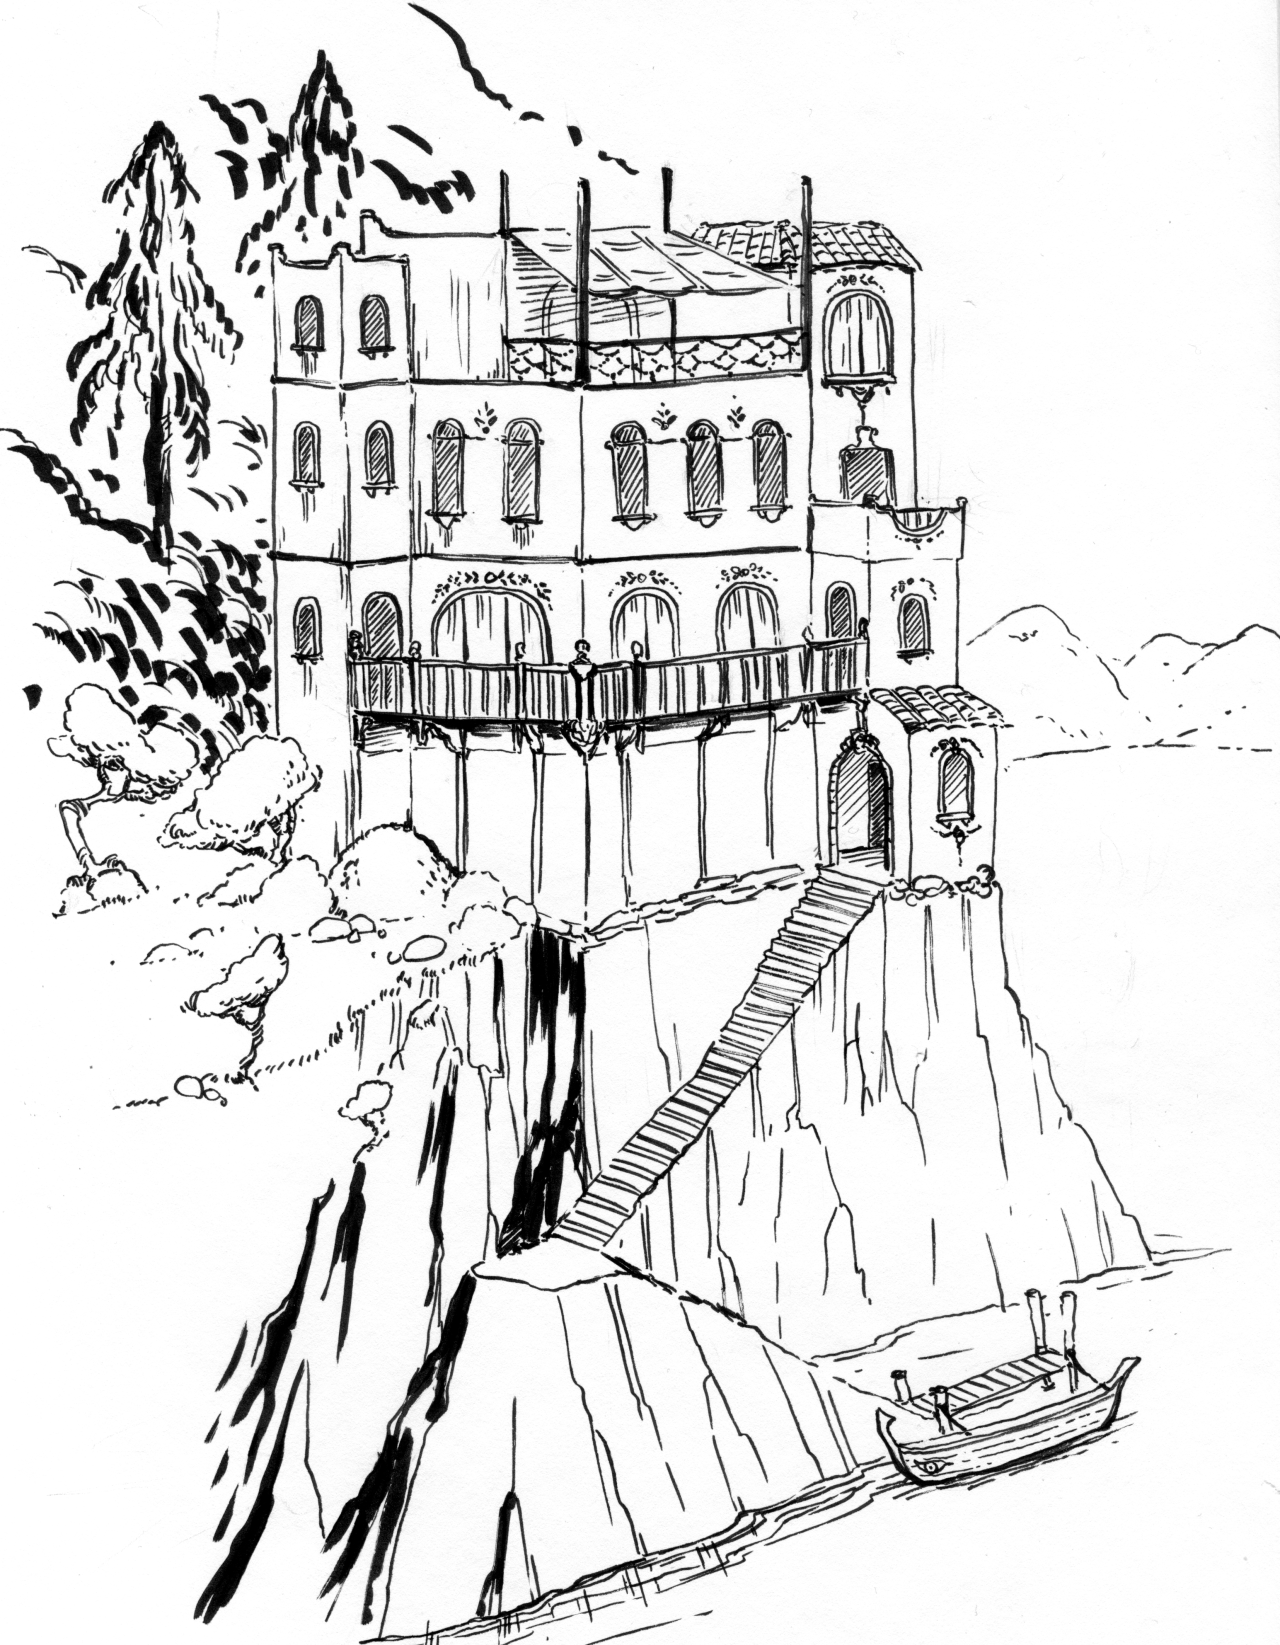 theserestlesshands: Inktober 24 - The Villa I drew a little house.  Who do you think